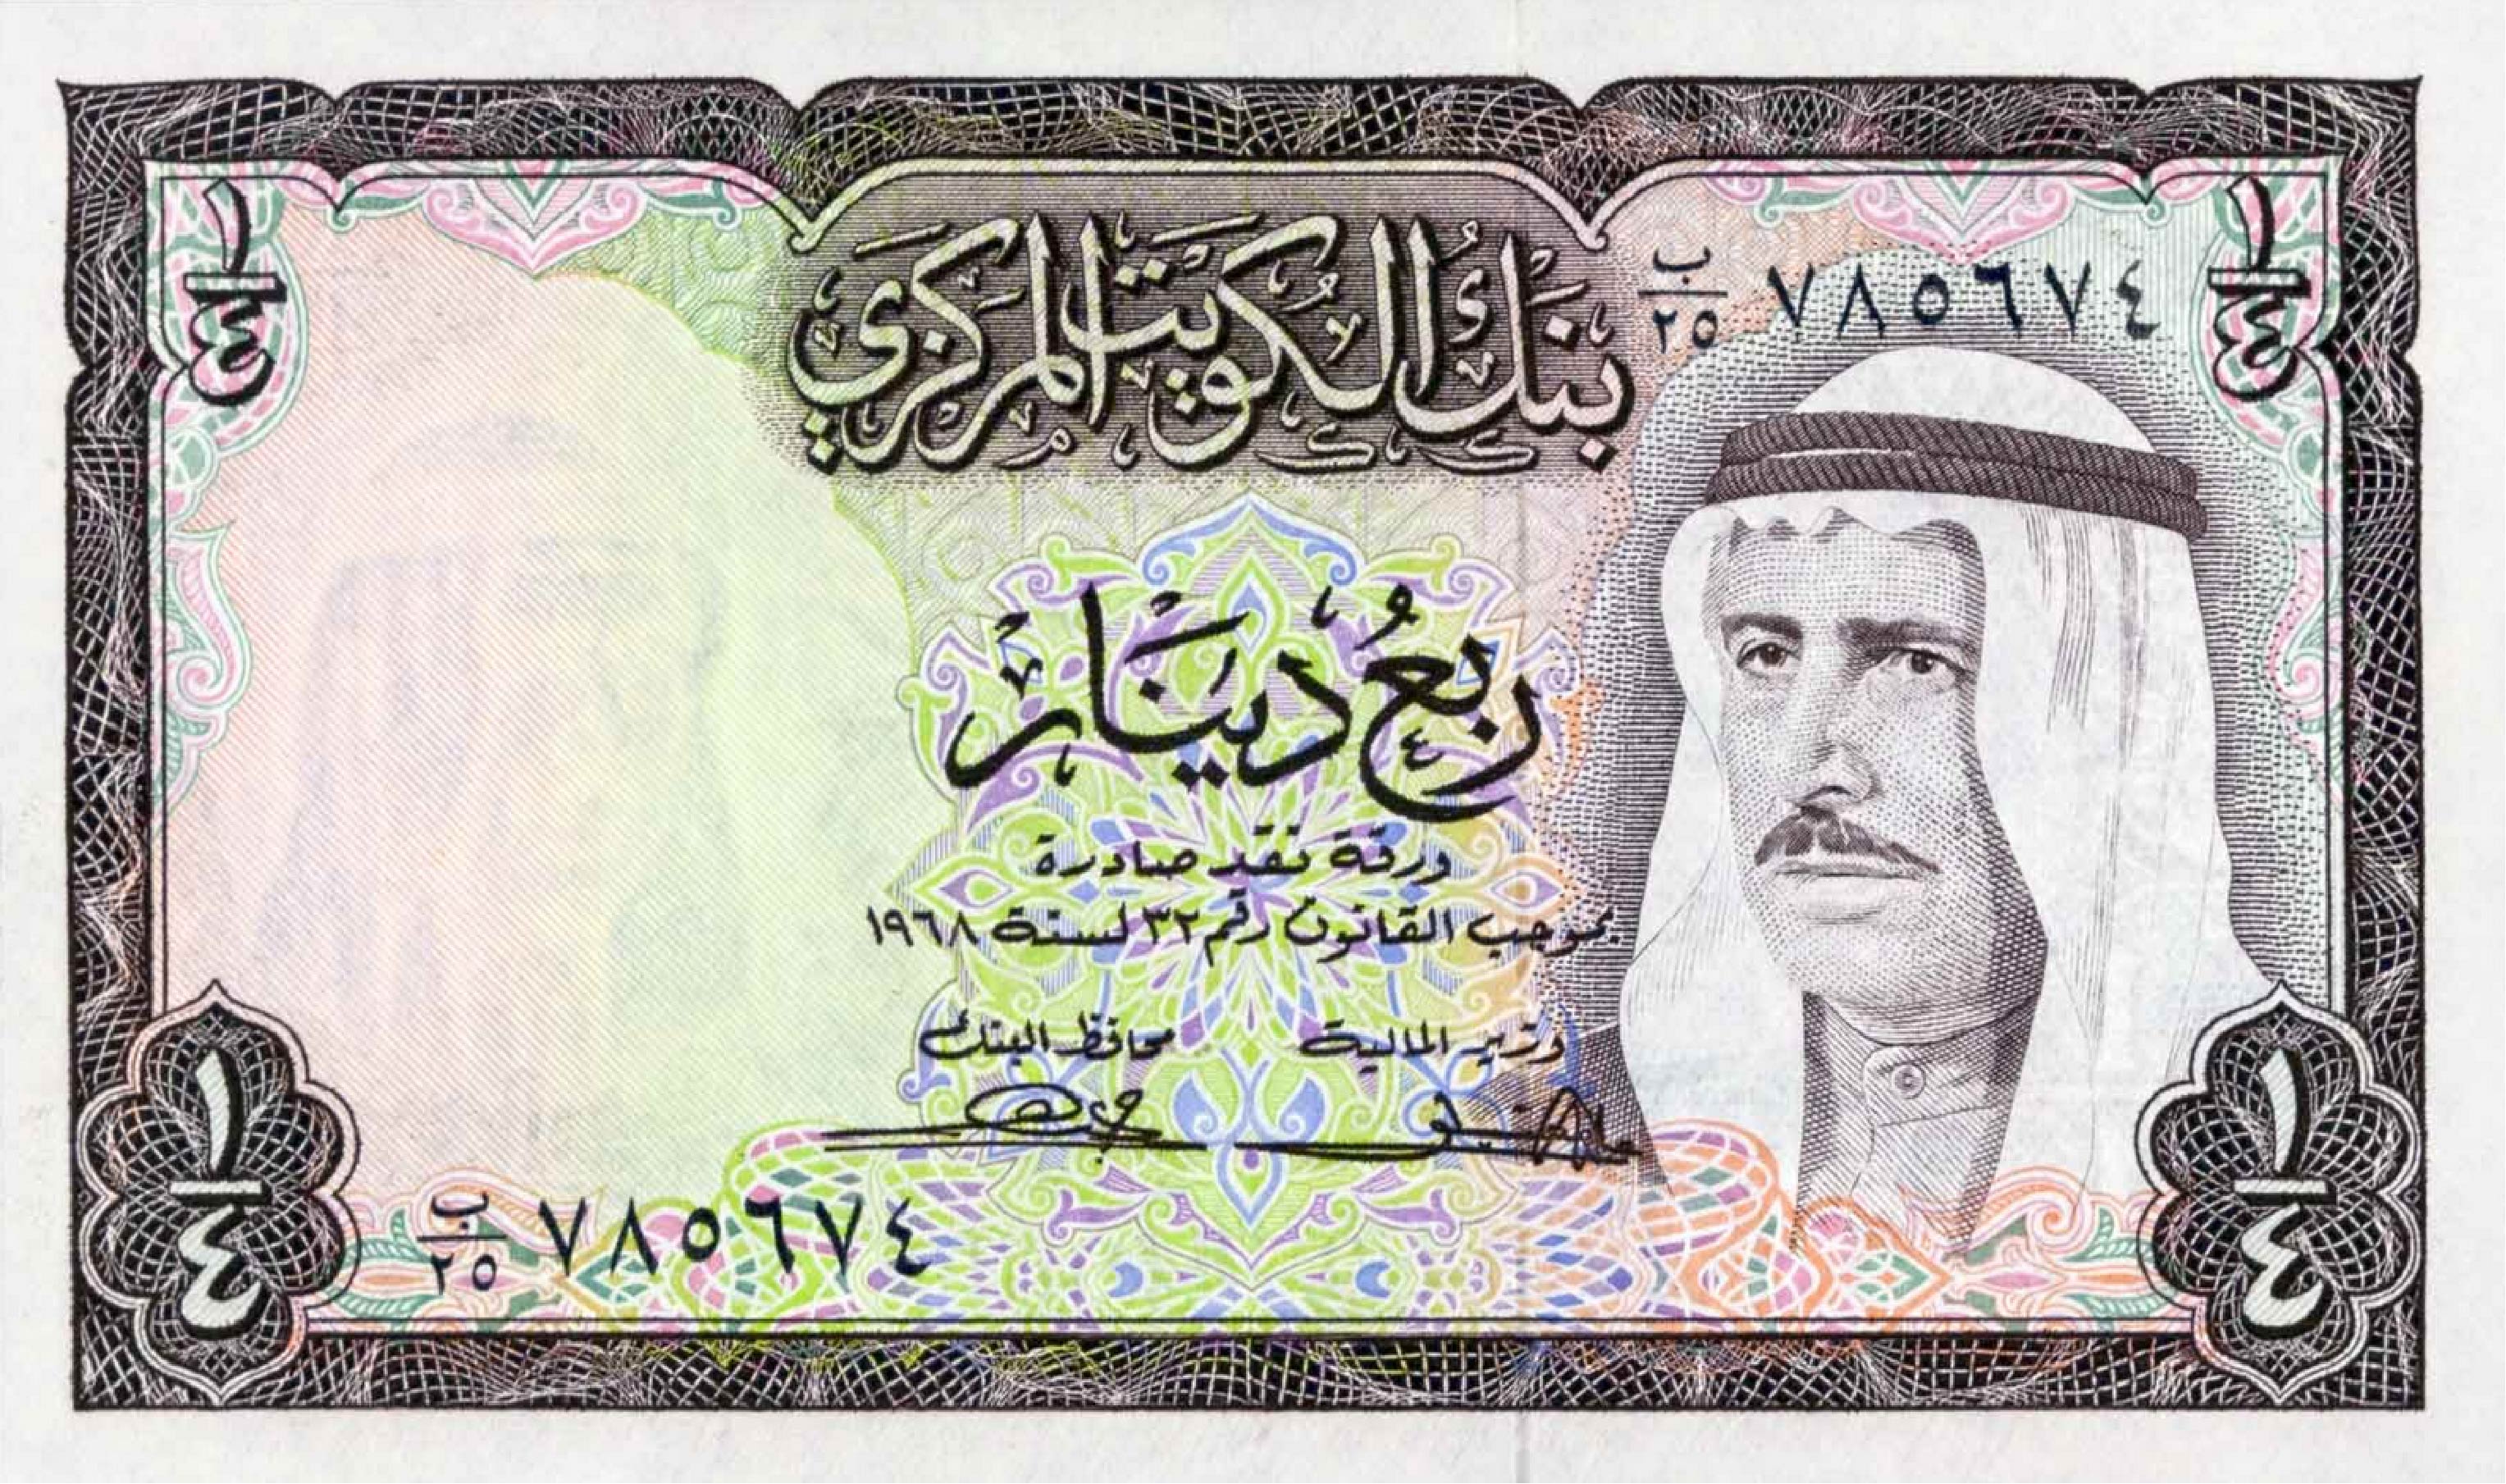 1/4 Dinar Kuwait banknote (2nd Issue) - Exchange yours for cash today